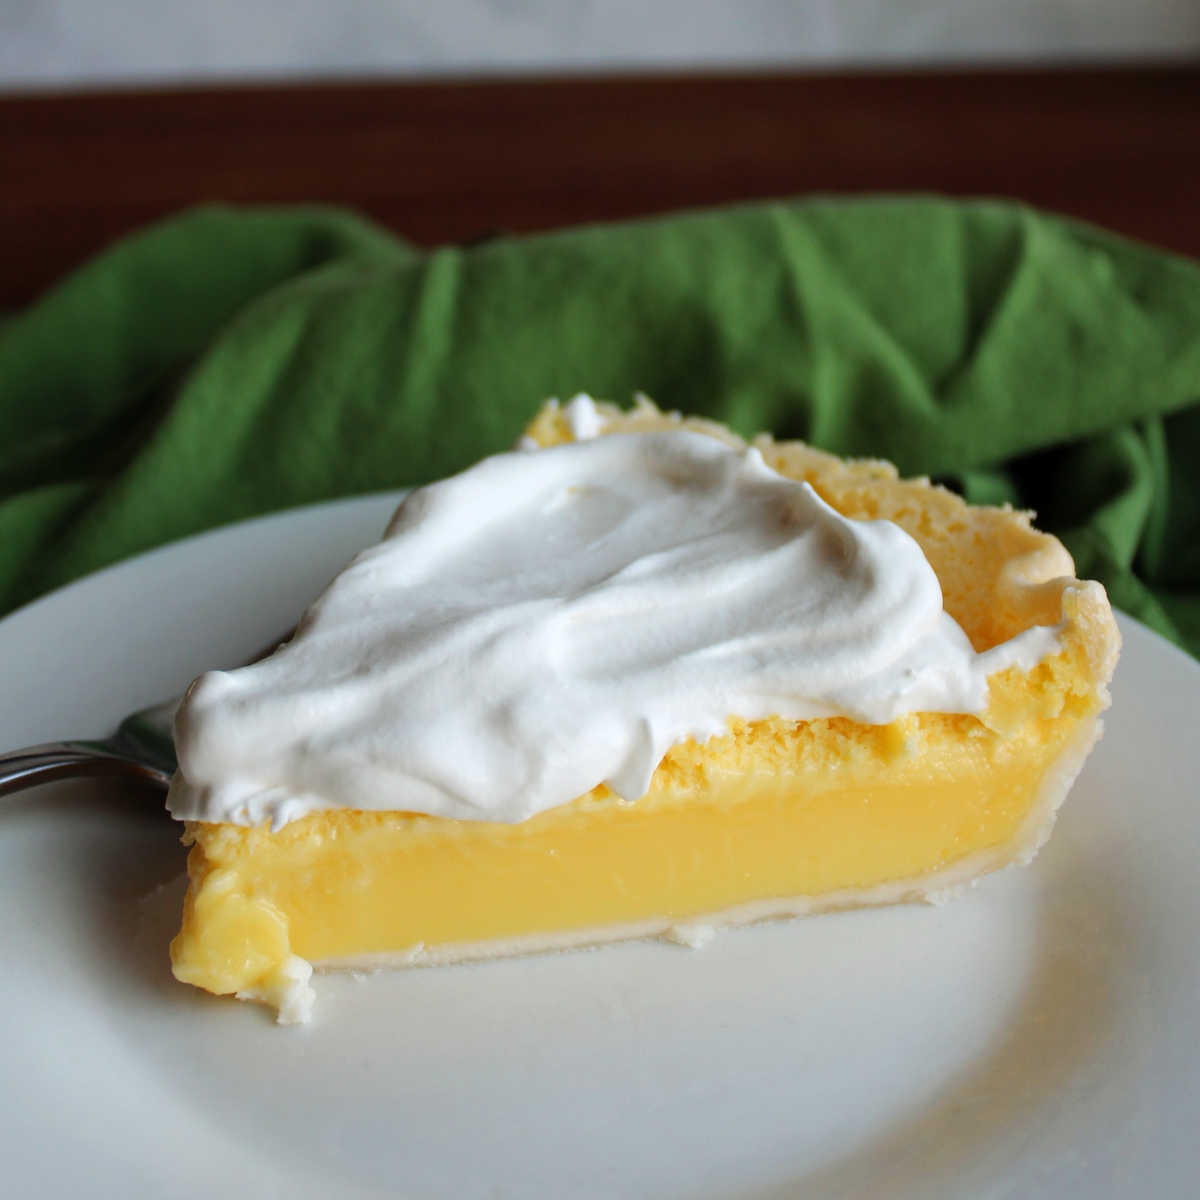 Side view of slice of lemon pie showing smooth lemon filling topped with fluffy white honey whipped cream.